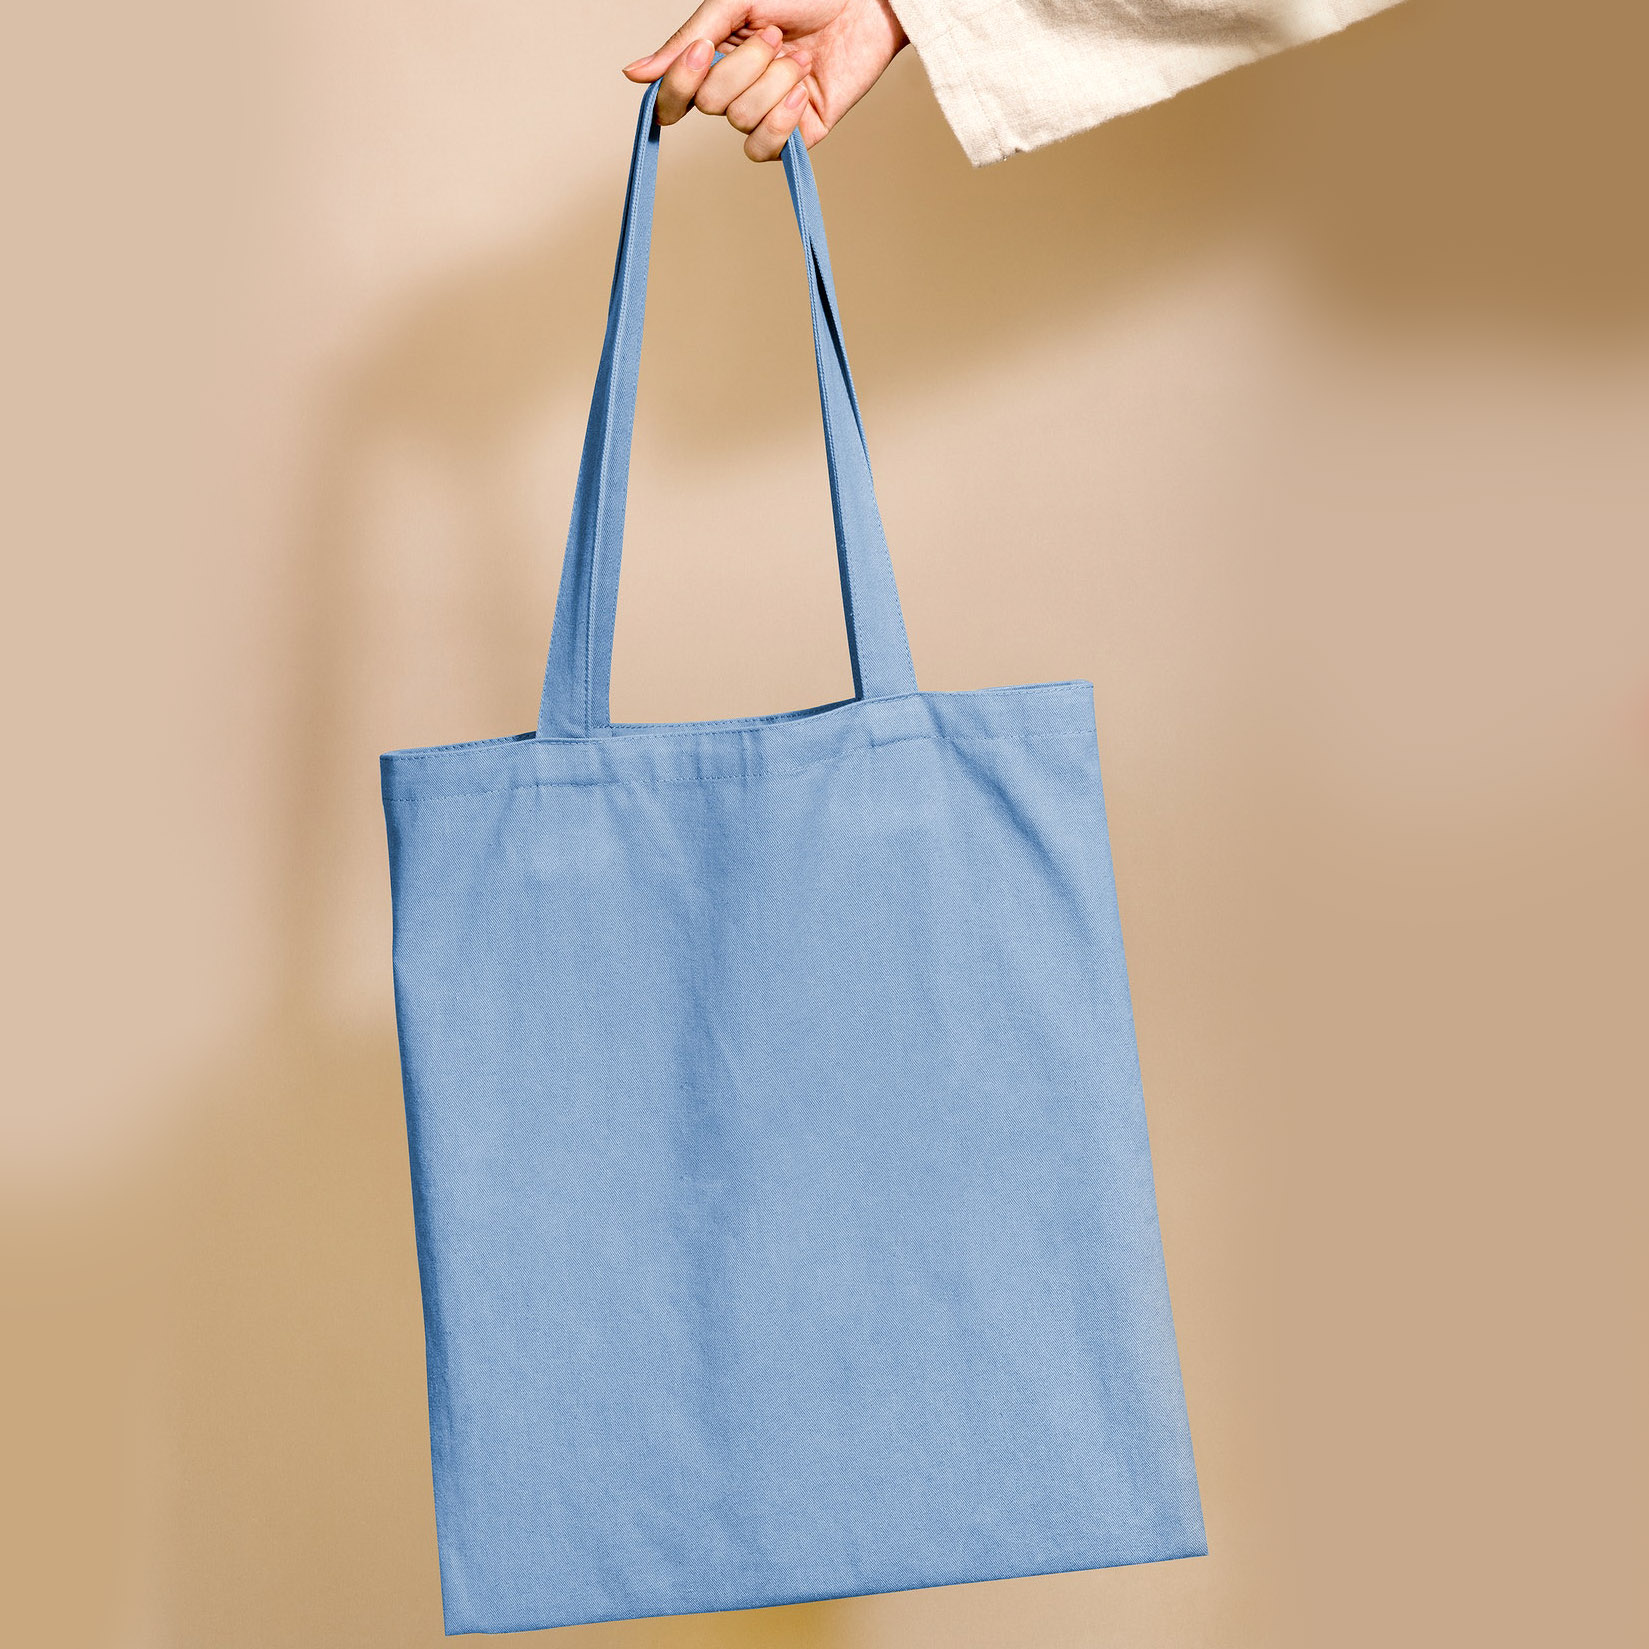 Cotton Totes For Shopping & Promotional Gift - PRESTIGE CREATIONS FACTORY